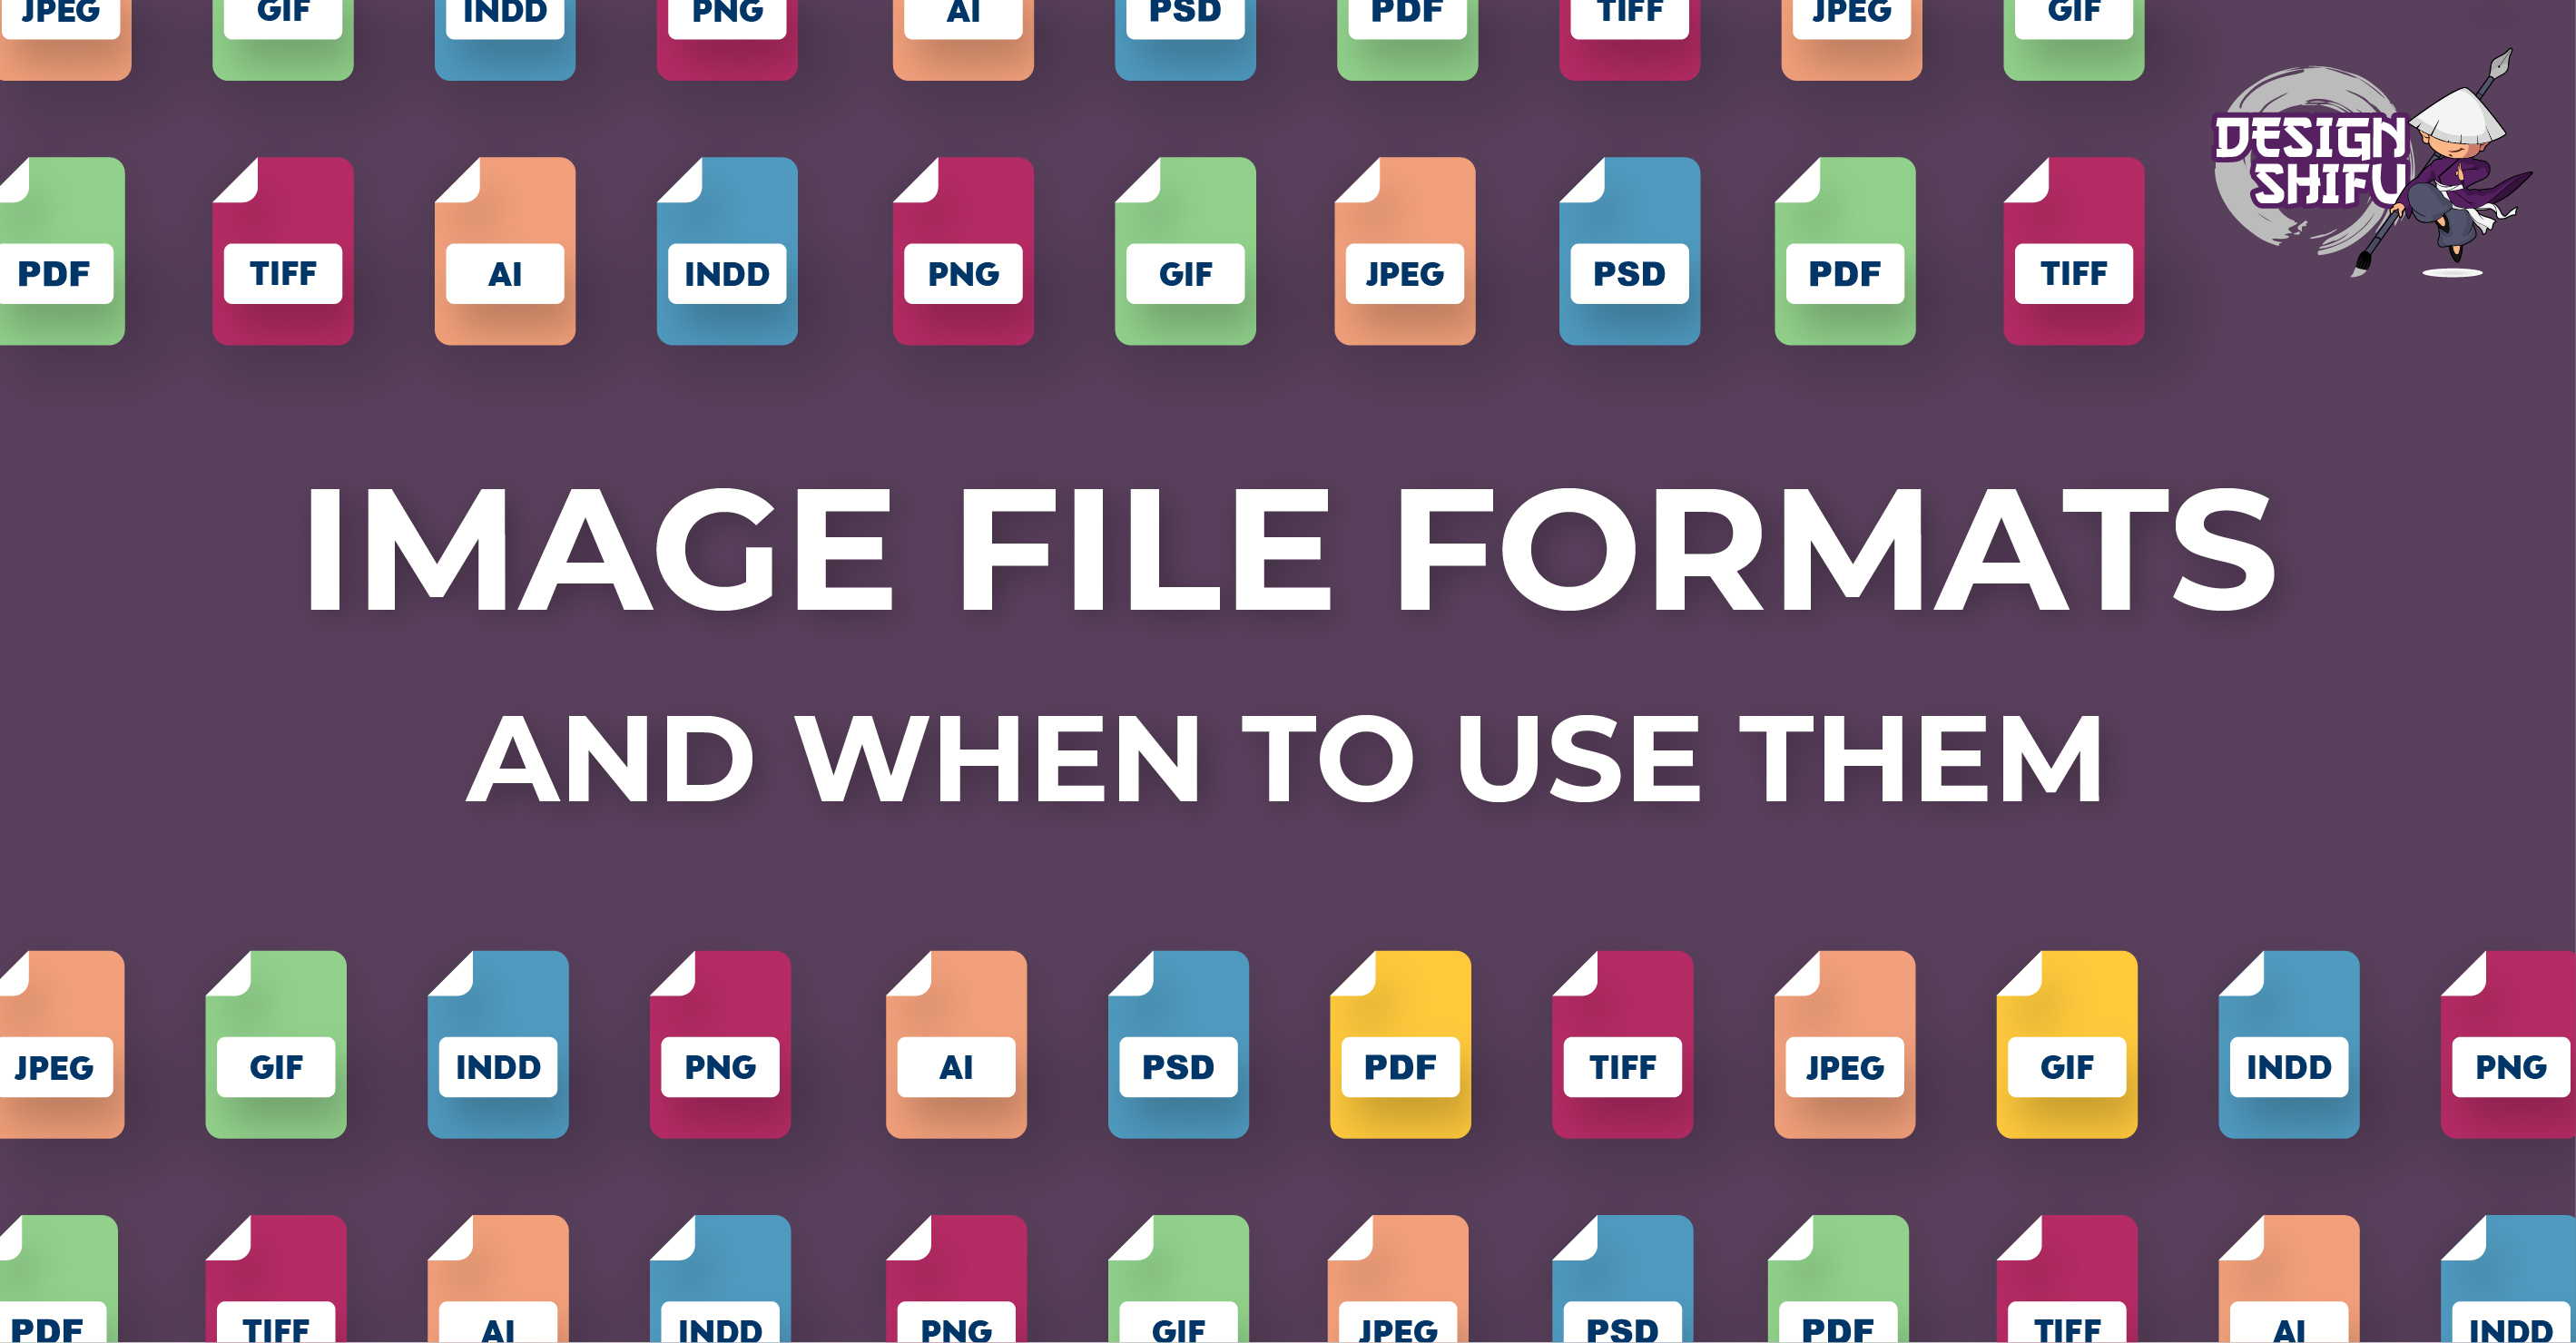 Image file formats and when to use them